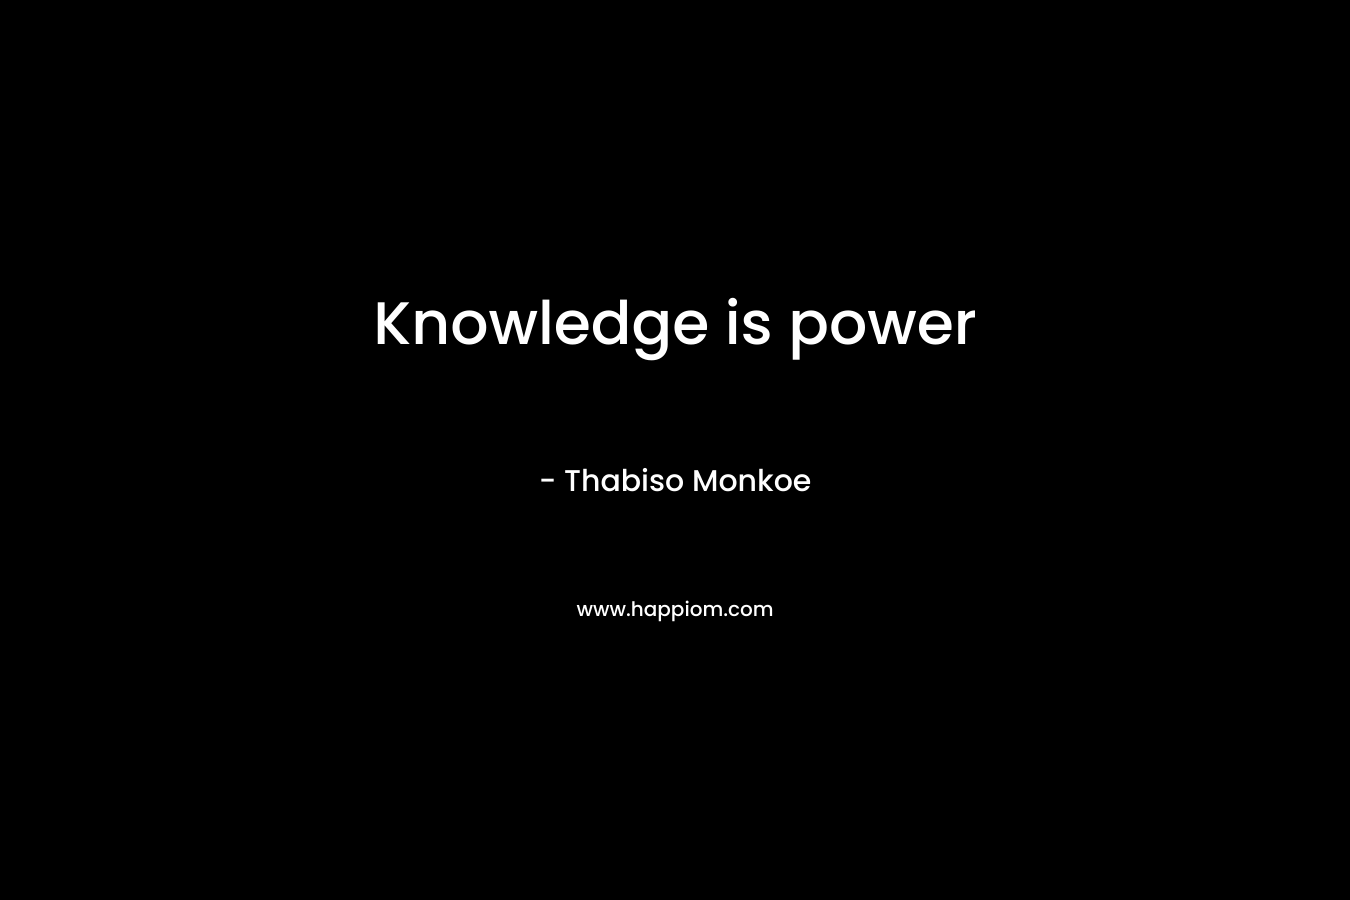 Knowledge is power